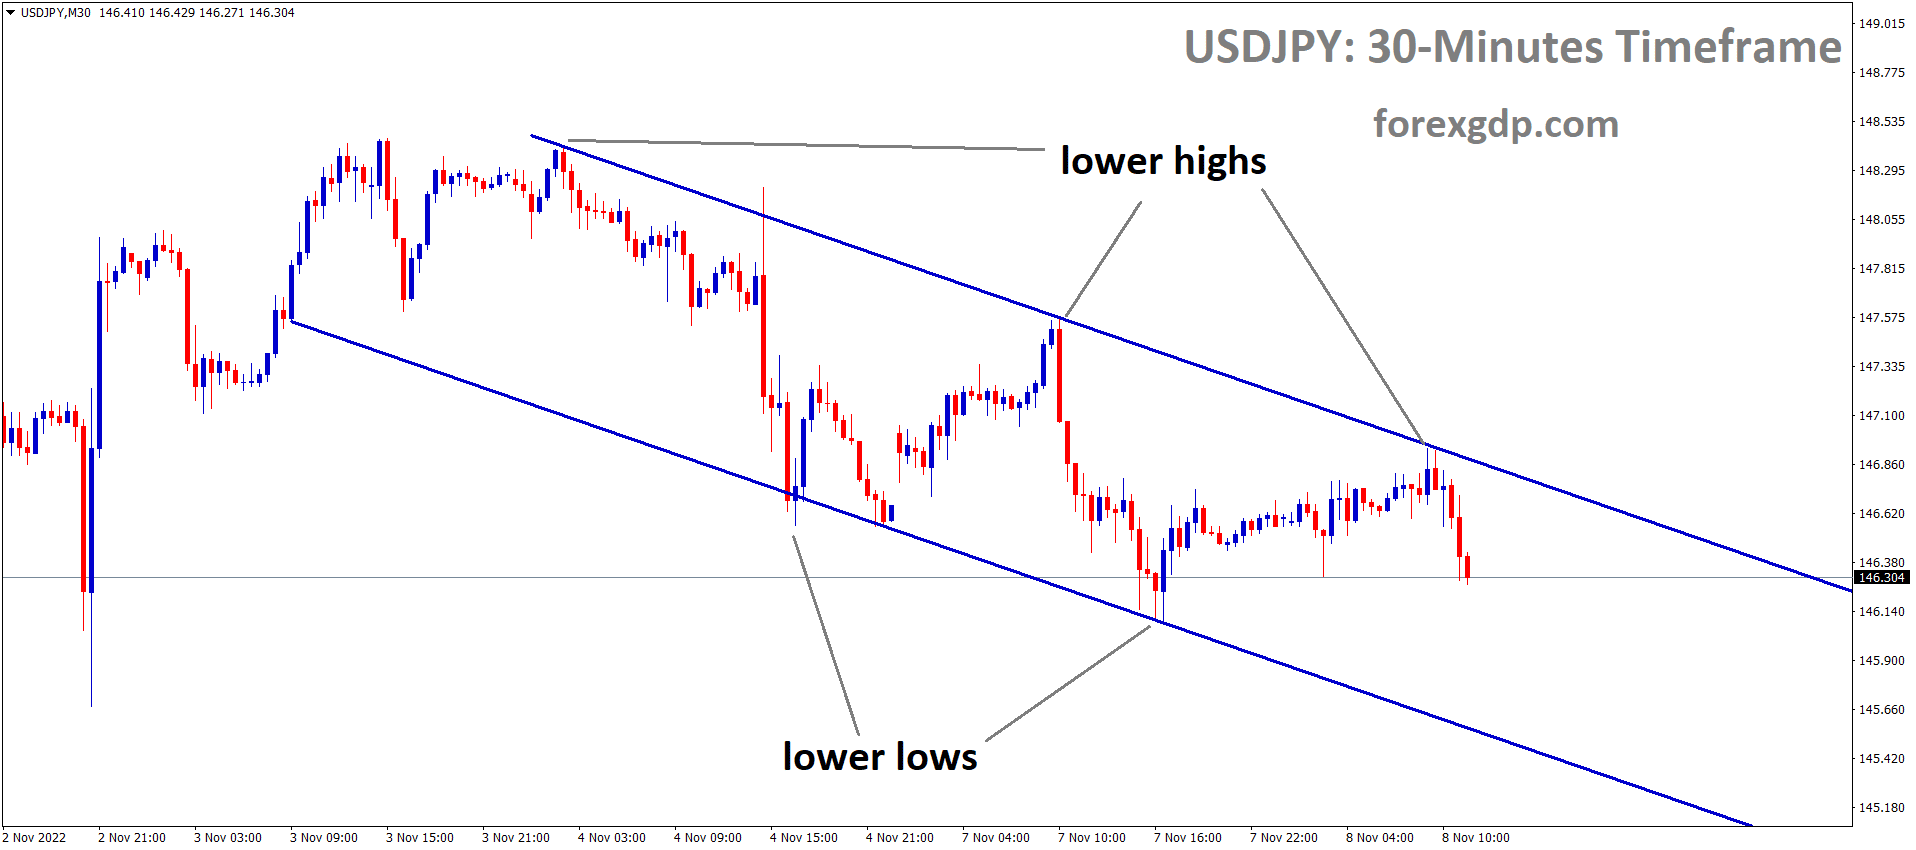 USDJPY is moving in the Descending channel and the market has fallen from the lower high area of the channel